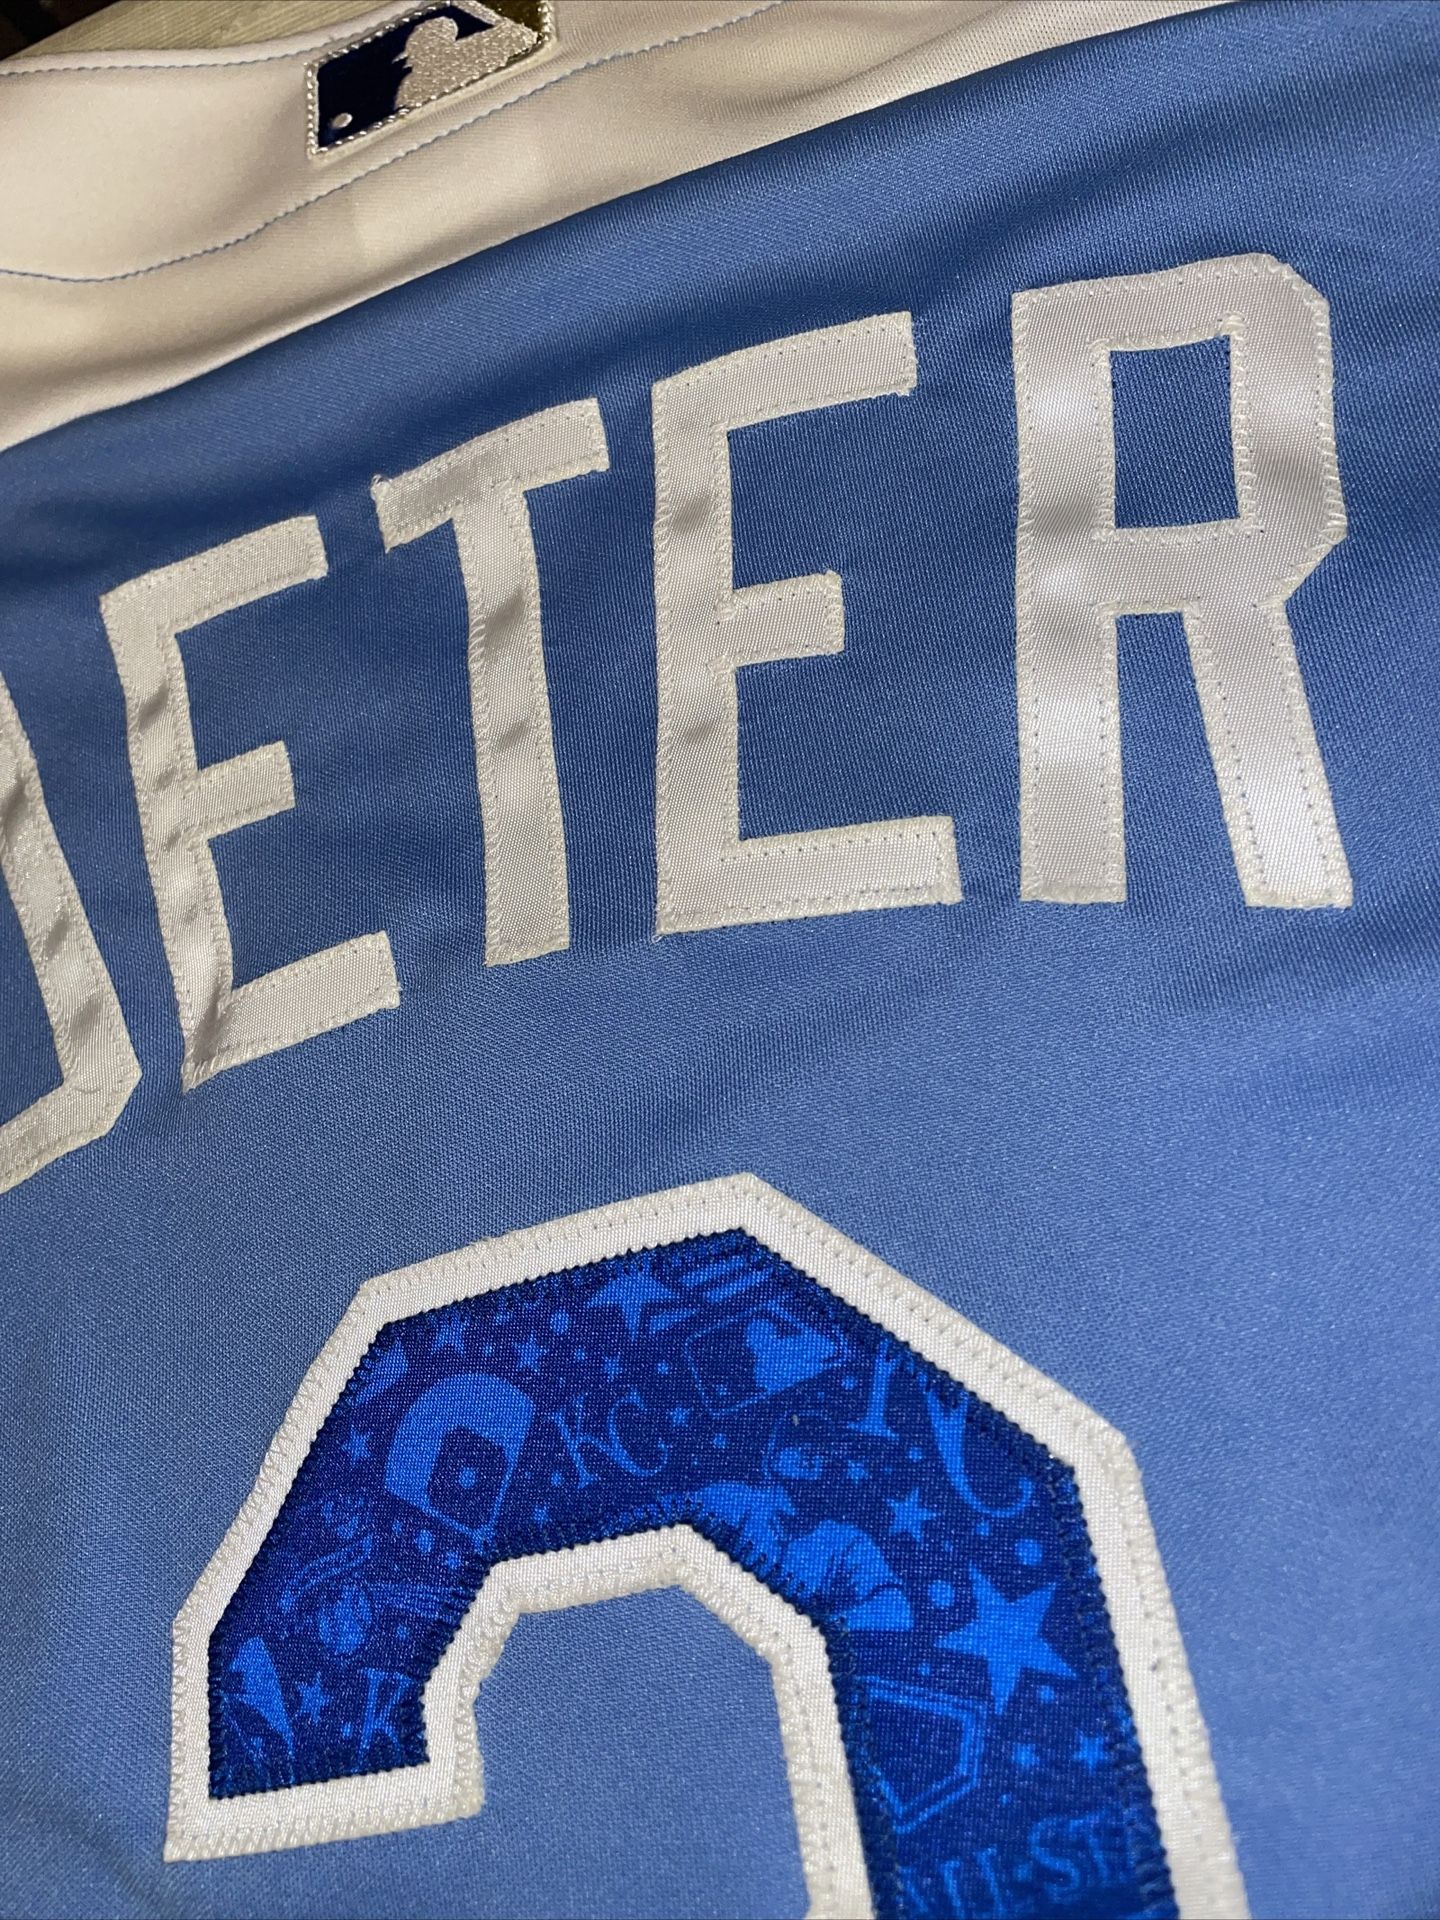 RARE VINTAGE DEREK JETER NEW YORK YANKEES BLUE MAJESTIC MLB JERSEY SZ LARGE  for Sale in Niagara Falls, NY - OfferUp